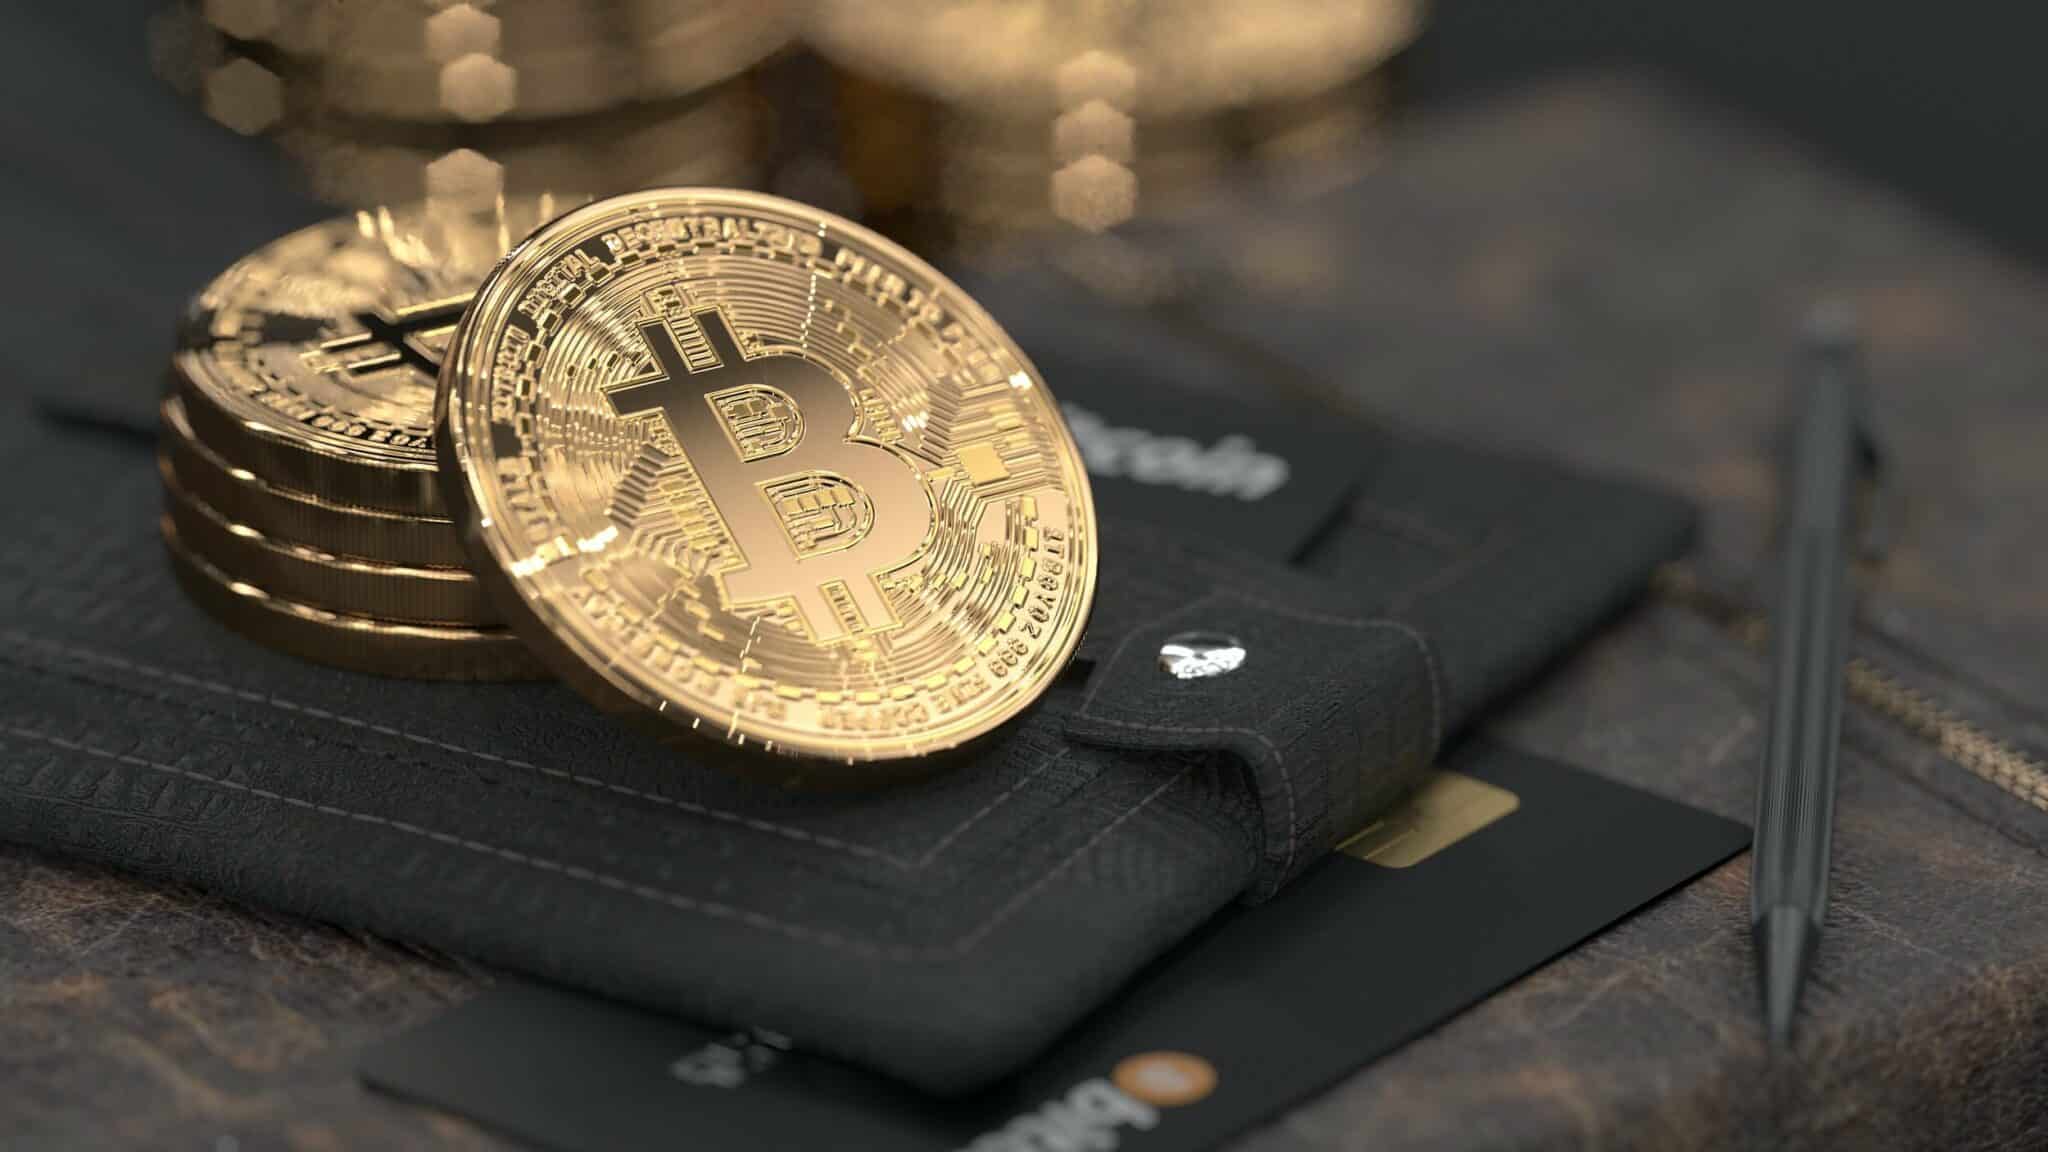 Pile of physical Bitcoins sitting on a wallet